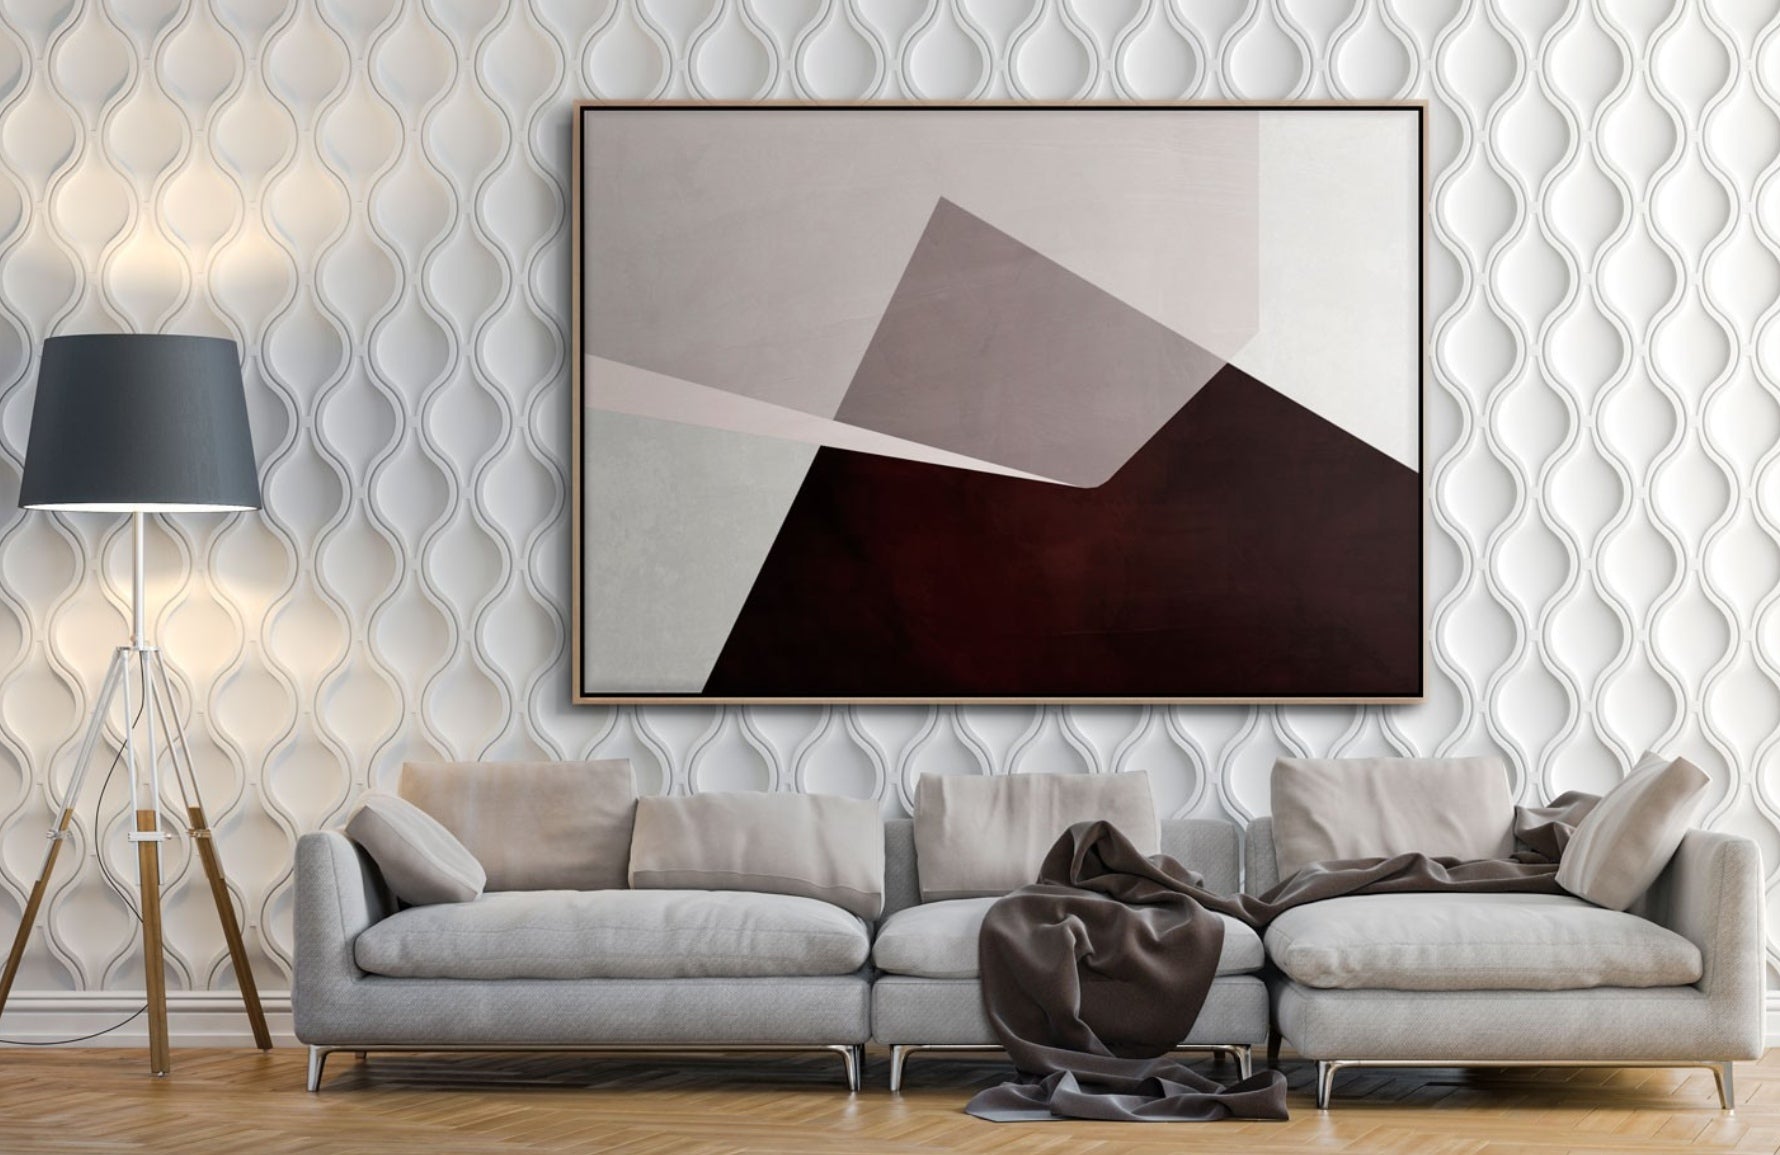 Living Room Wall Decor Ideas How To Display Art LuxDeco